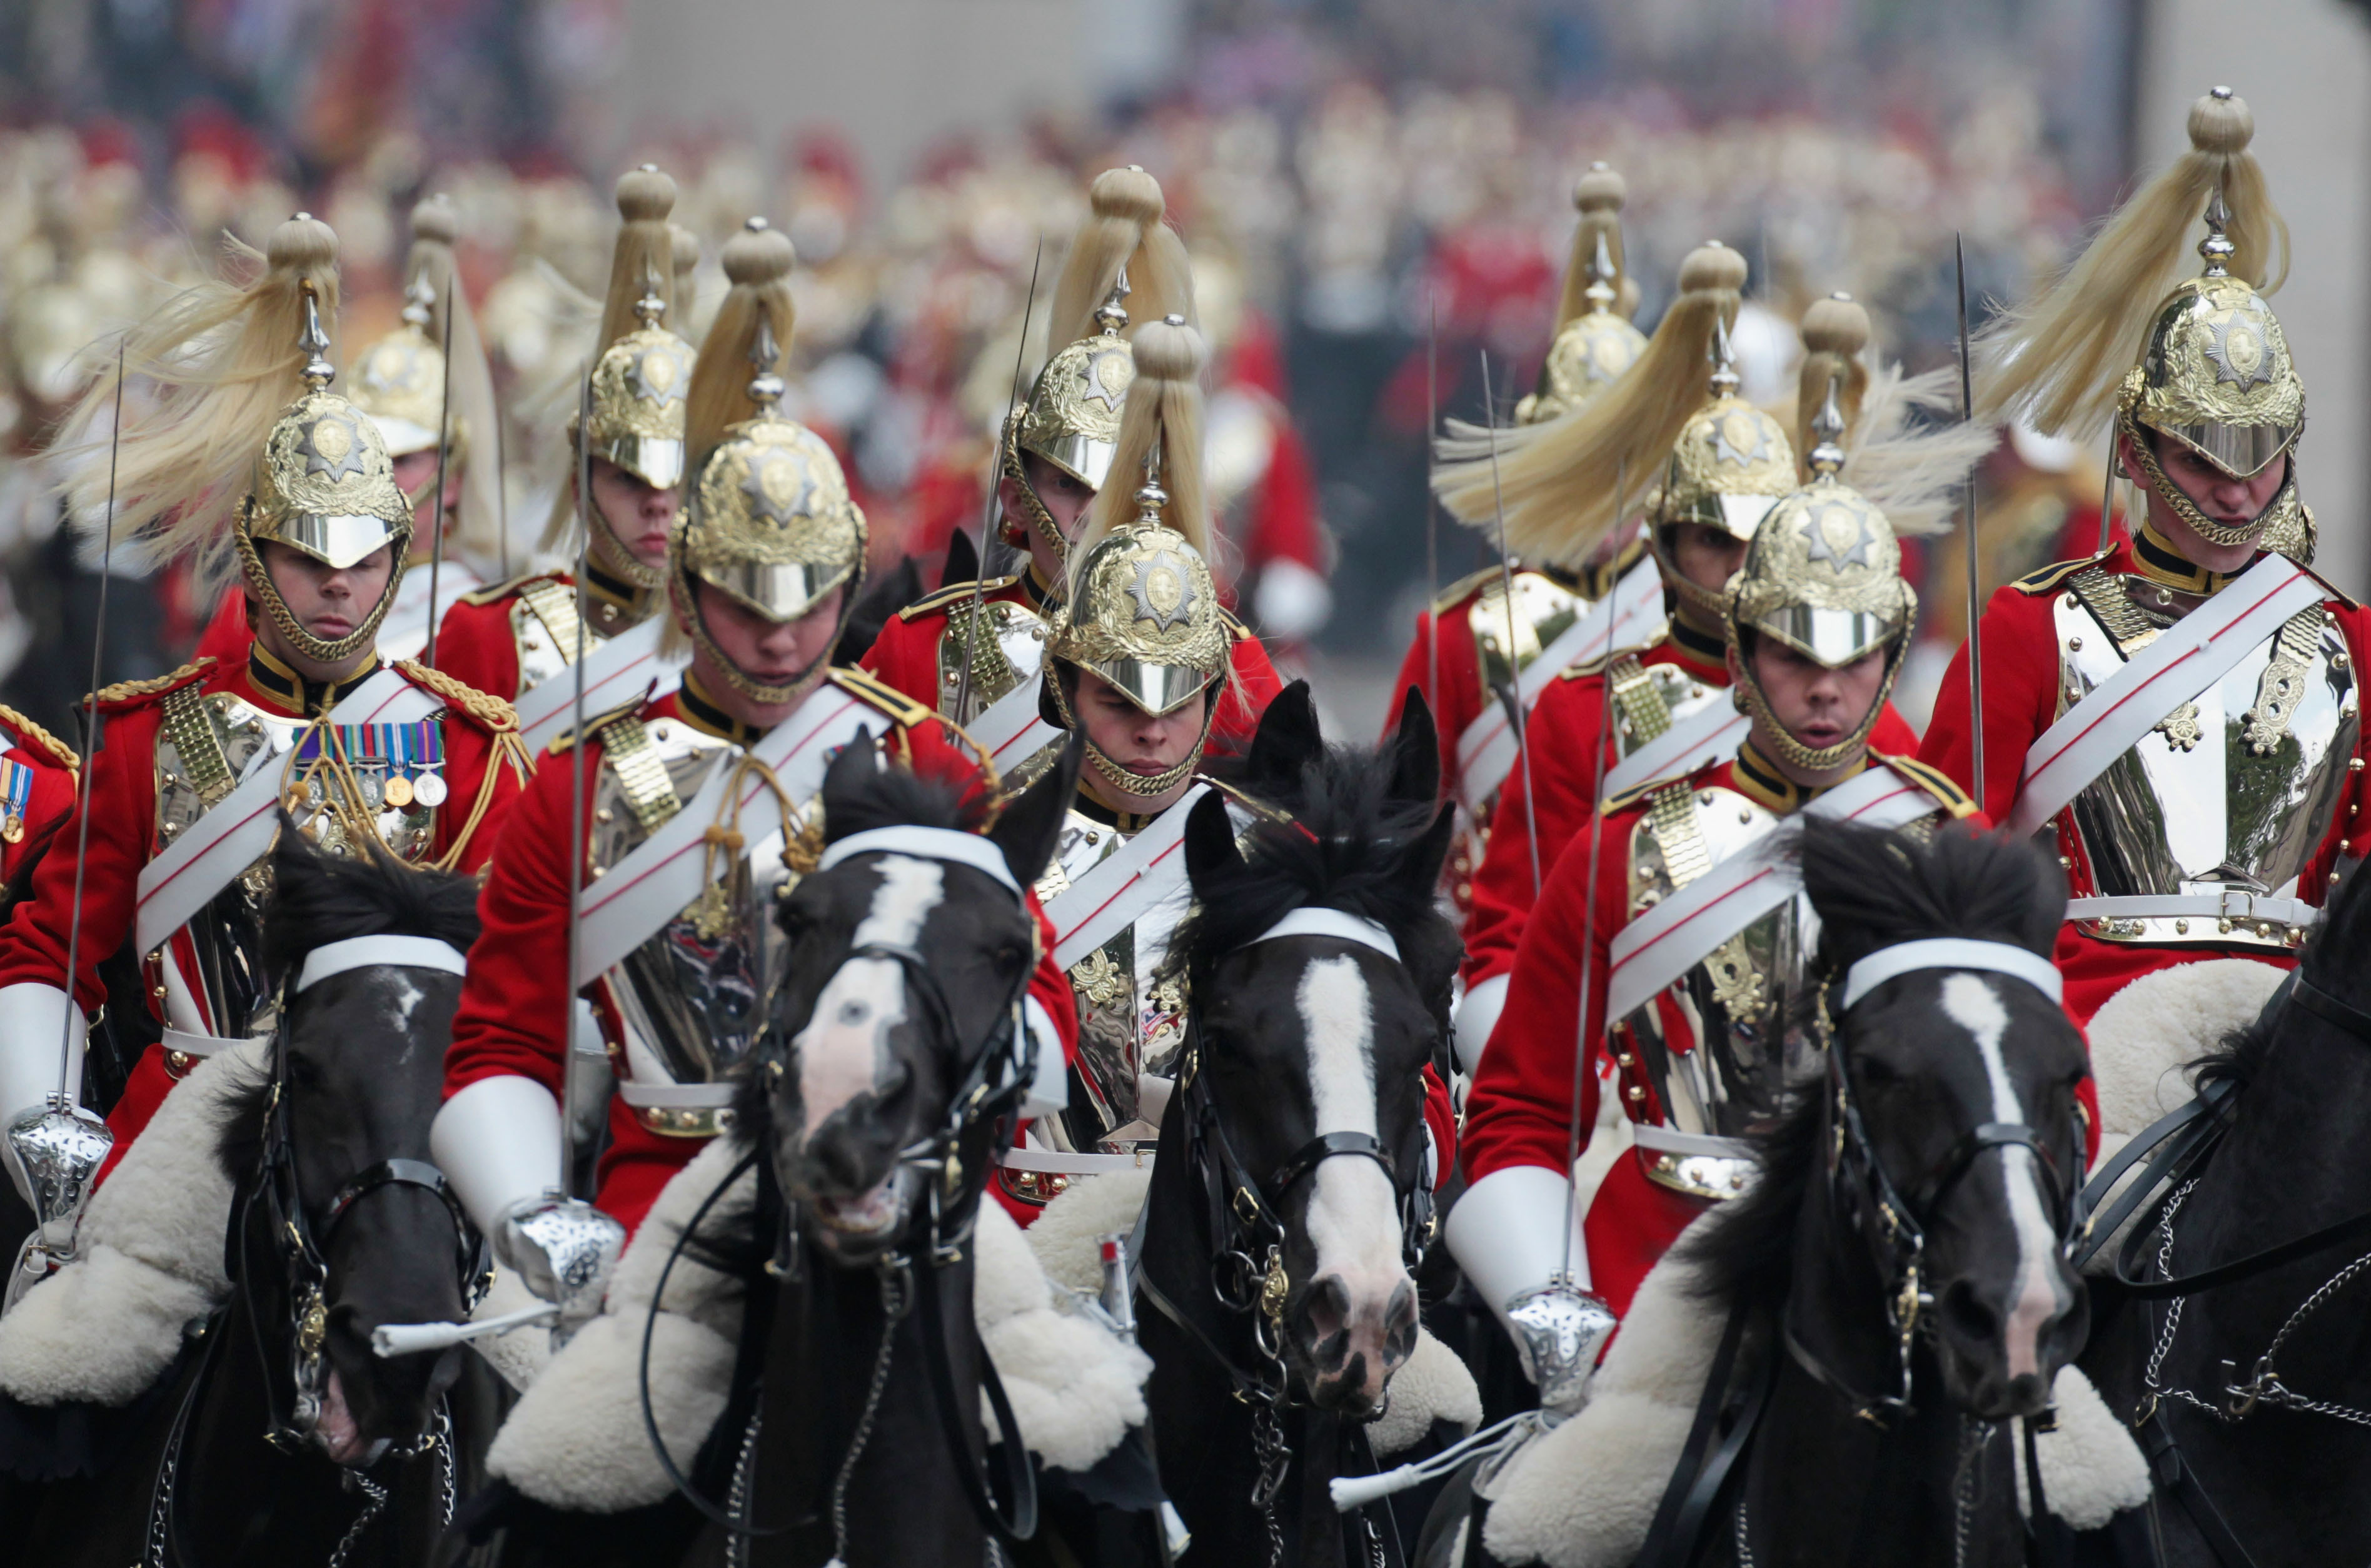 The Mounted Regiment of the Household Cavalry